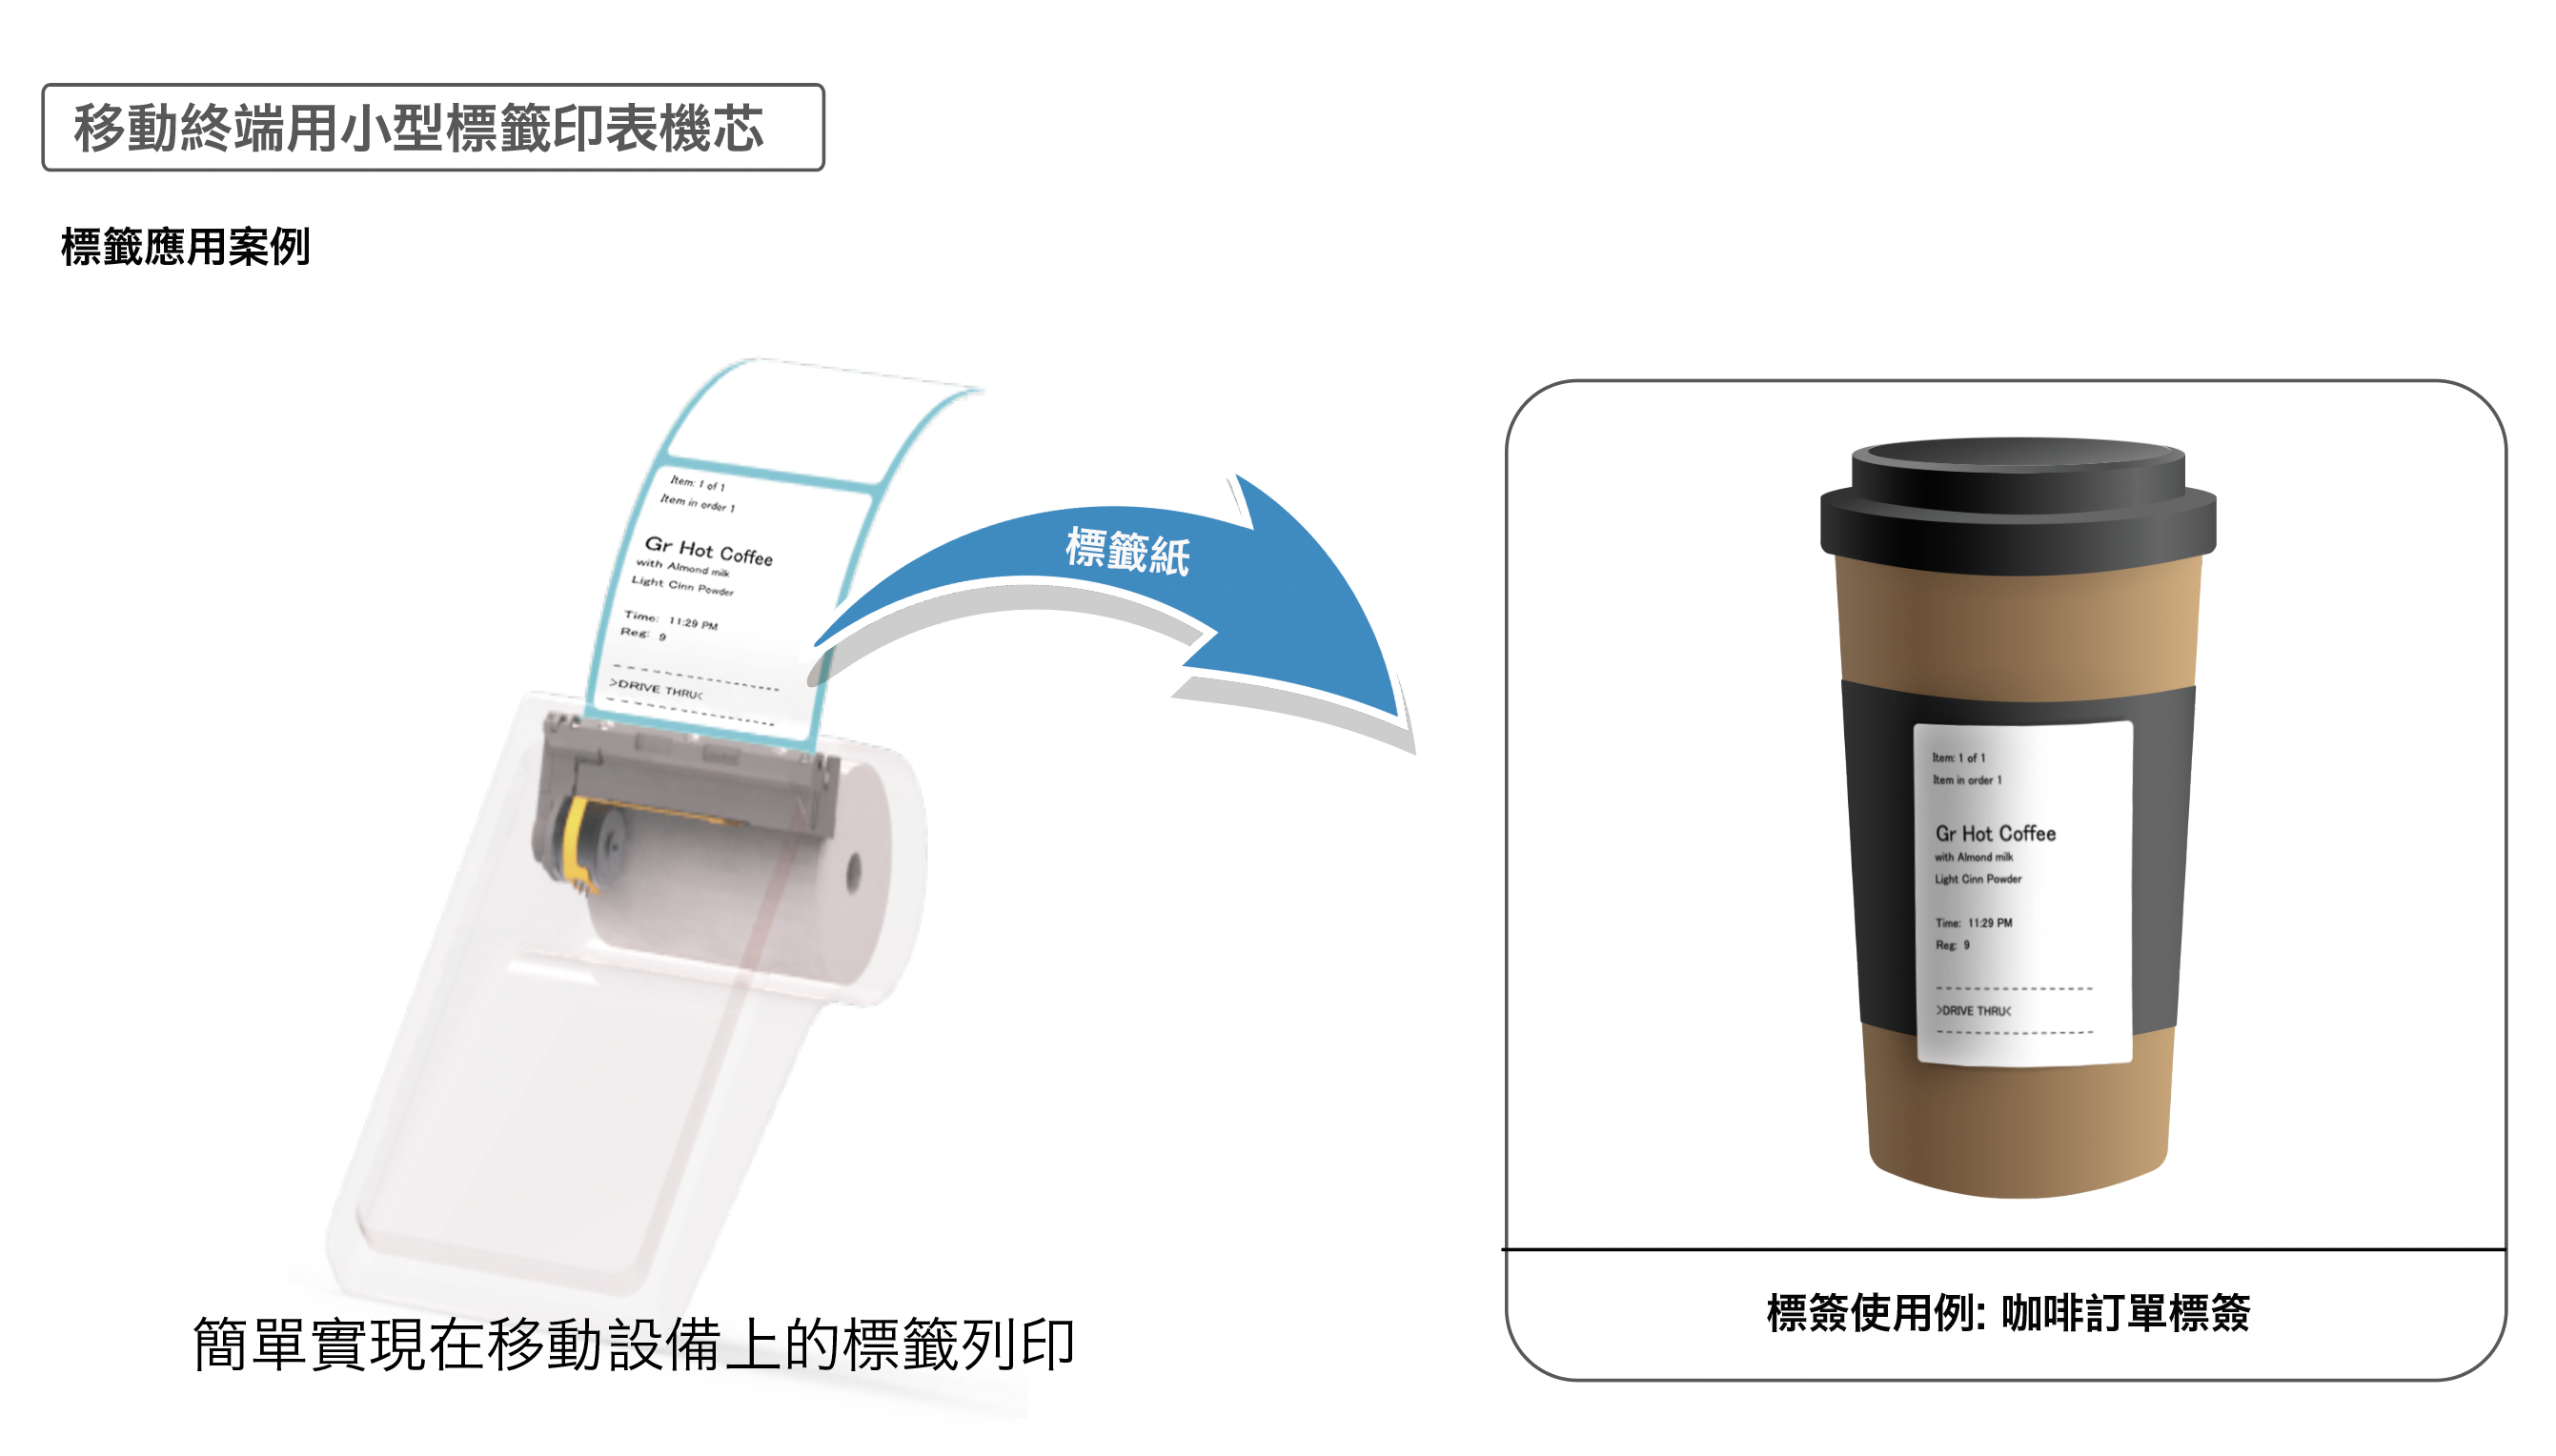 Ultra-compact mechanism for label printing mobile terminal